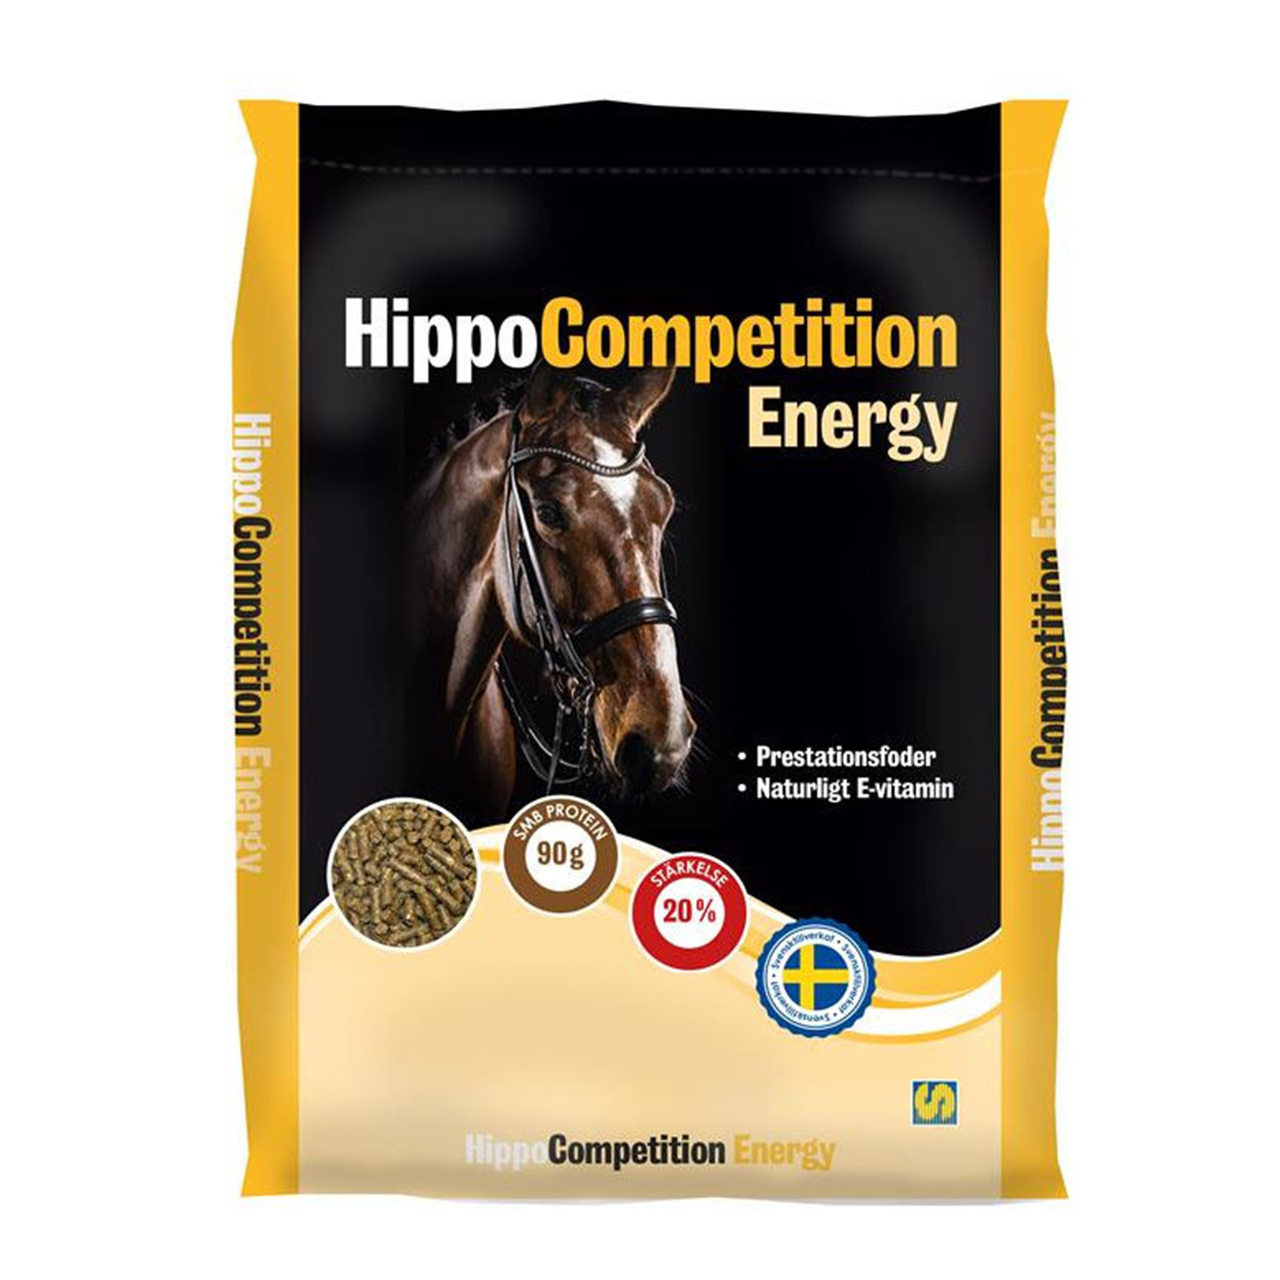 HIPPO COMPETITION ENERGY "TOP CHAMP" 15KG